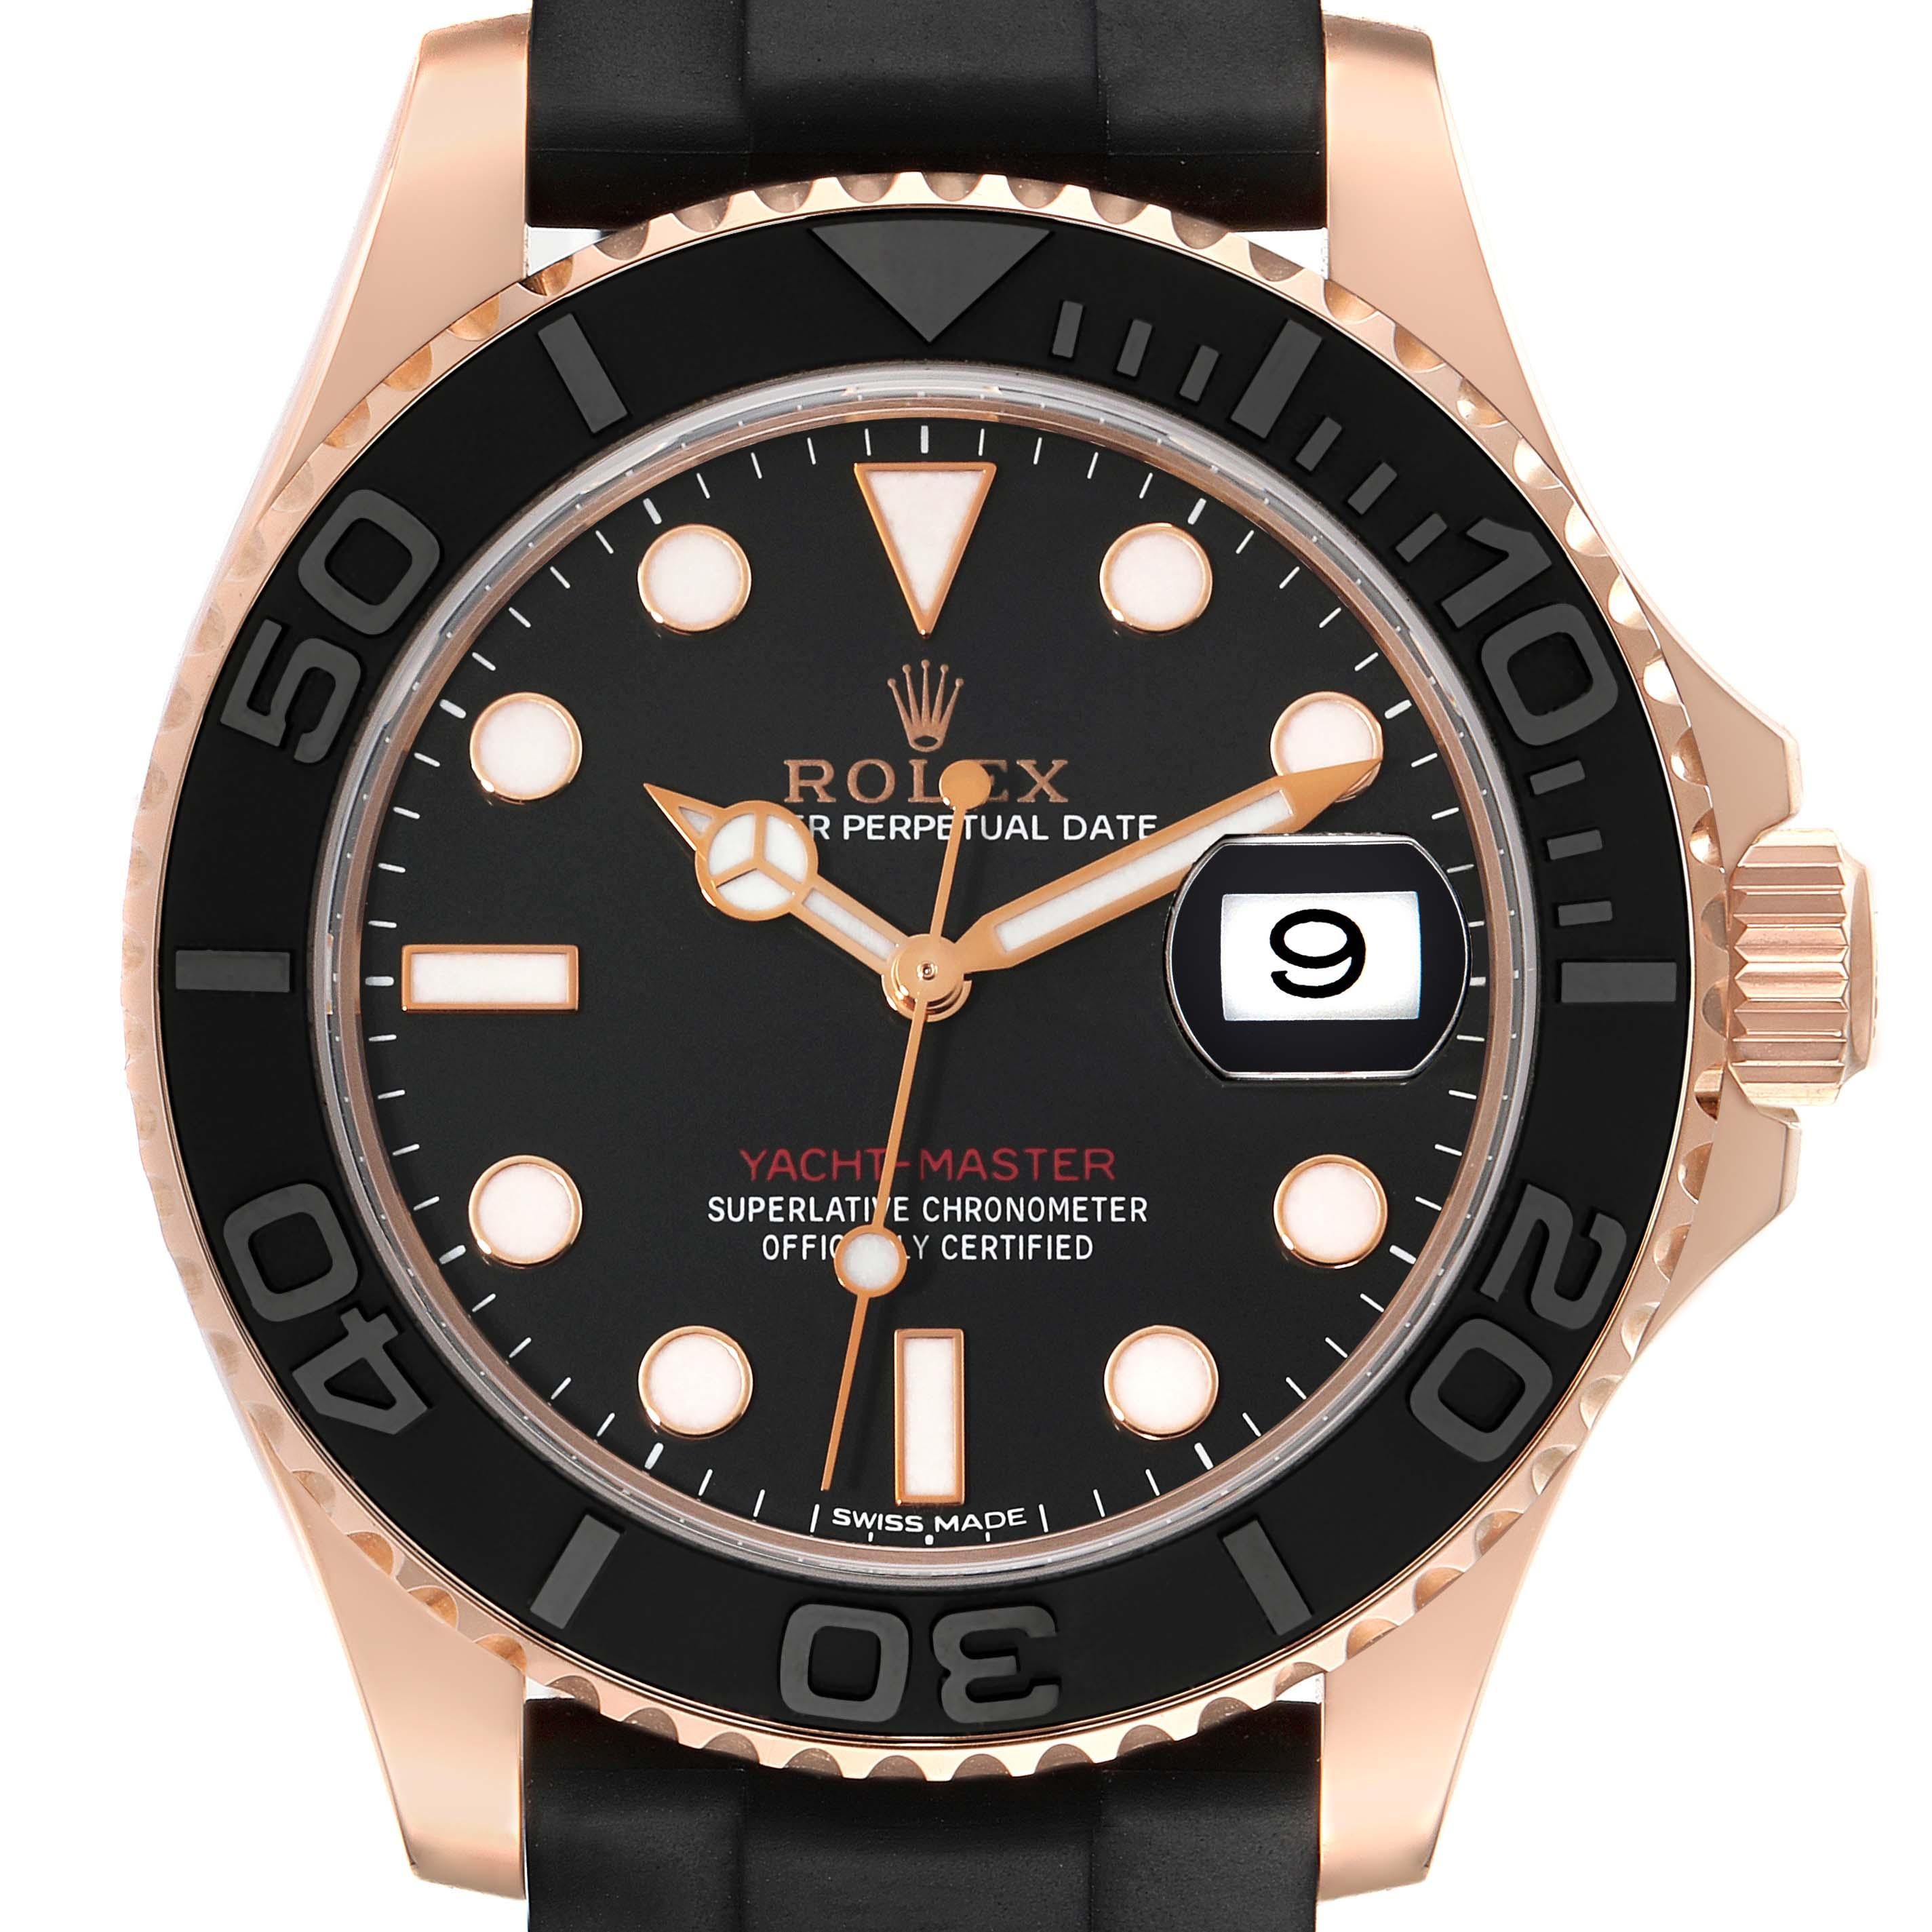 Rolex Yachtmaster 40mm Rose Gold Oysterflex Bracelet Mens Watch 116655. Officially certified chronometer automatic self-winding movement. 18k Everose gold case 40.0 mm in diameter. Screwed-down case back and crown, Triplock crown protected by crown